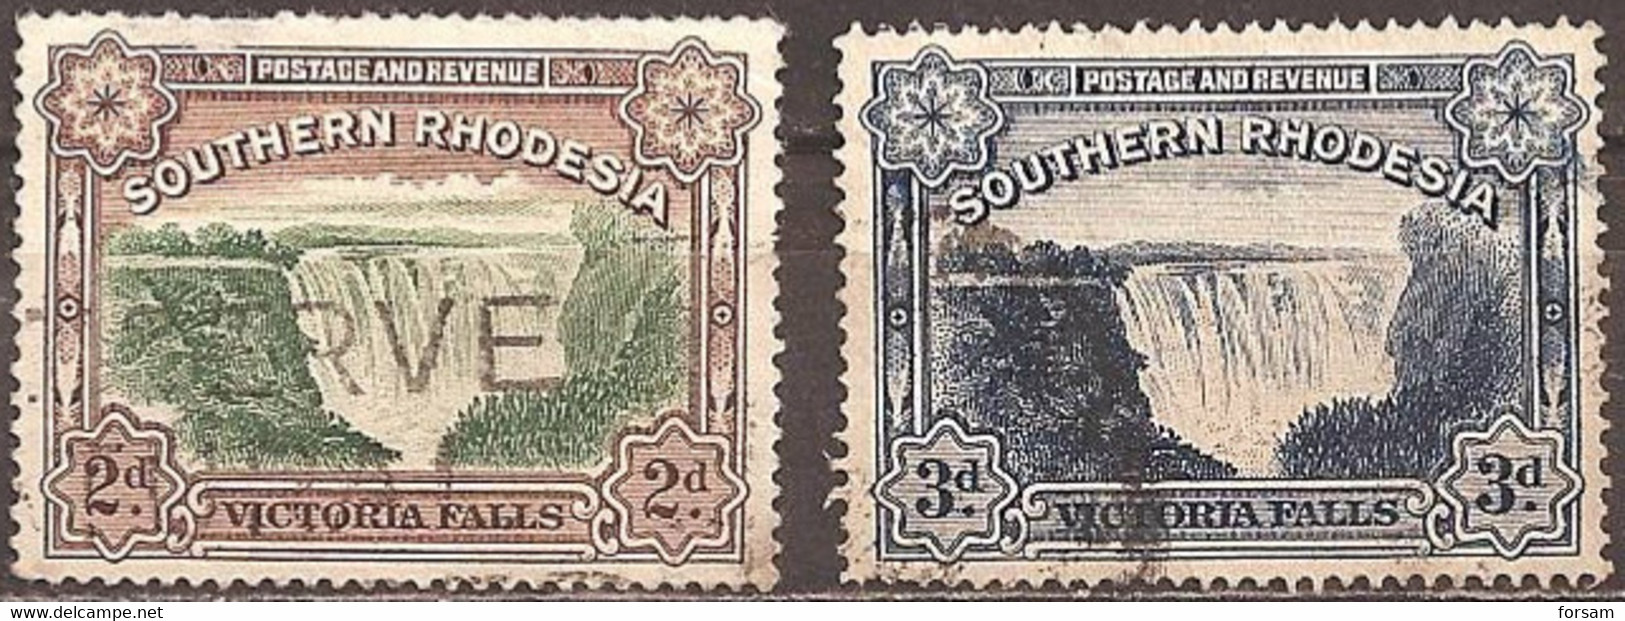 SOUTHERN RHODESIA..1932..Michel # 30-31...used. - Southern Rhodesia (...-1964)